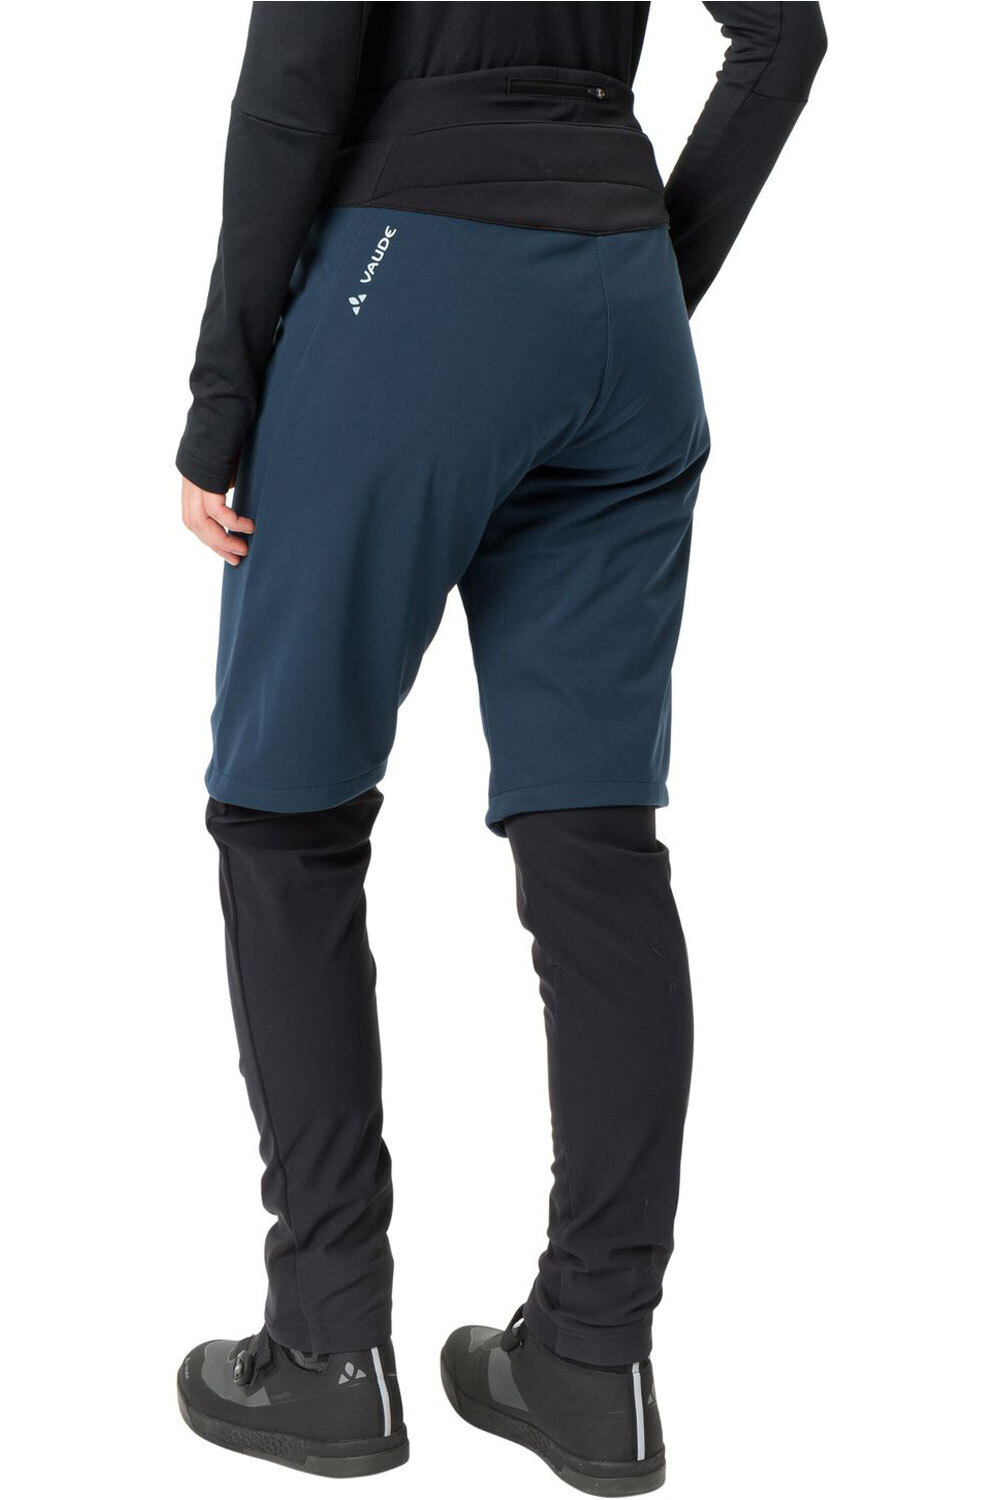 Vaude culotte largo mujer Women's All Year Moab 3in1 Pants w/o SC vista trasera